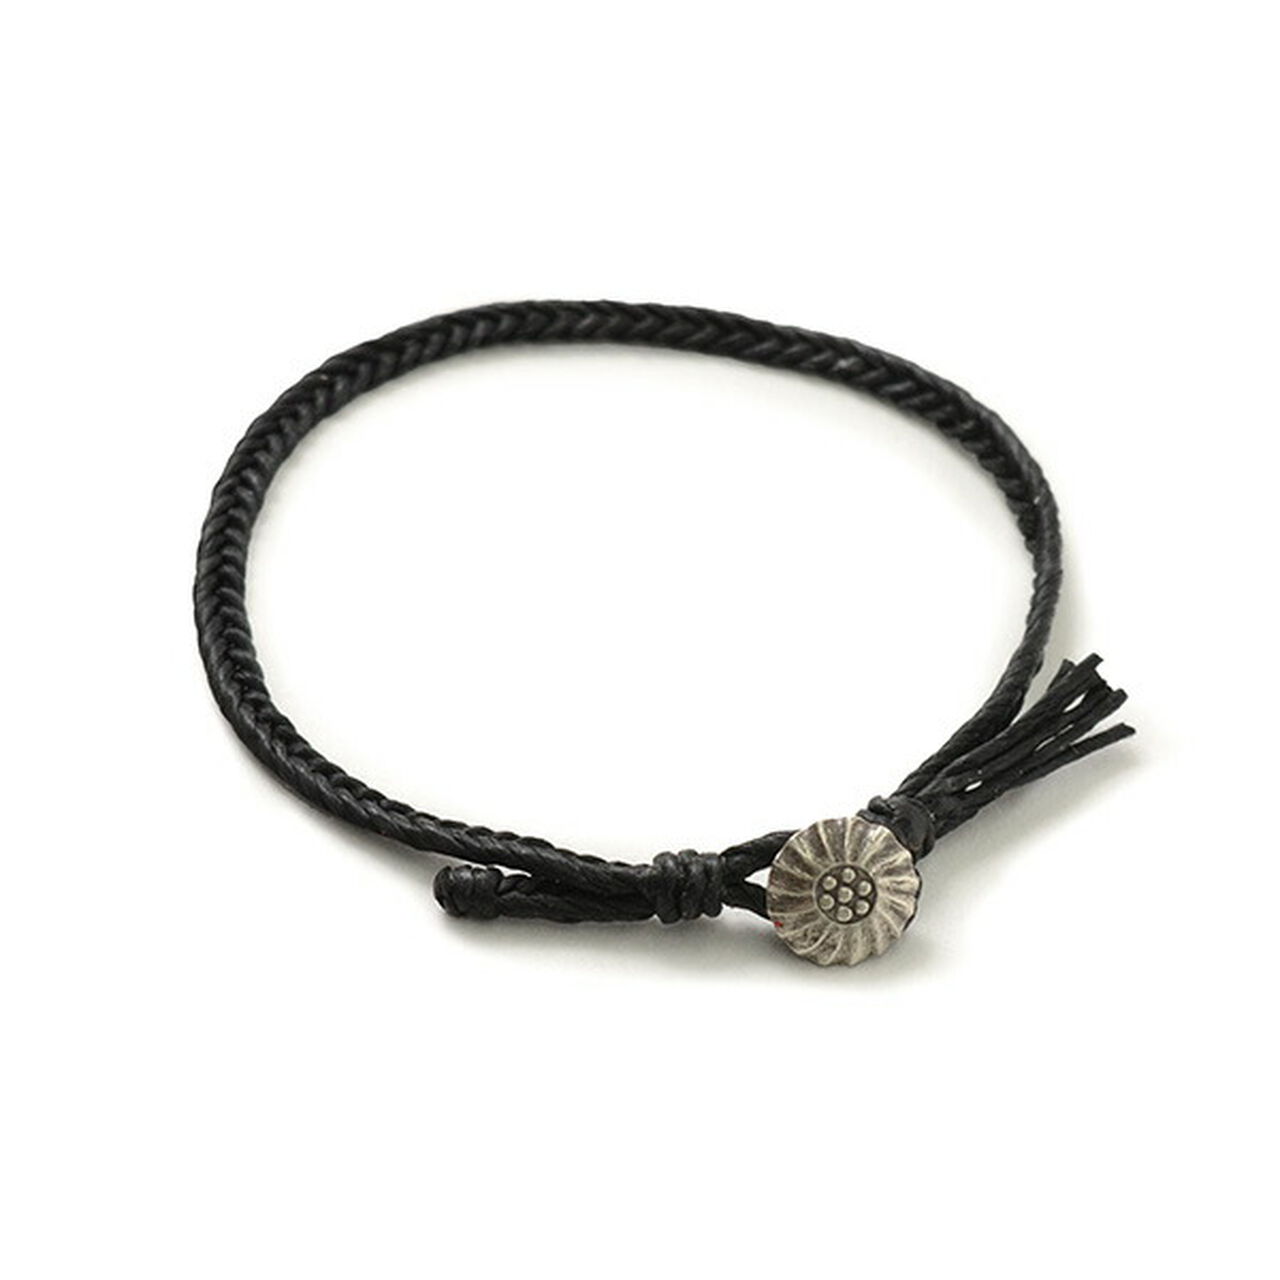 Wax Cord Concho Anklet Fishbone Braid,Black, large image number 0